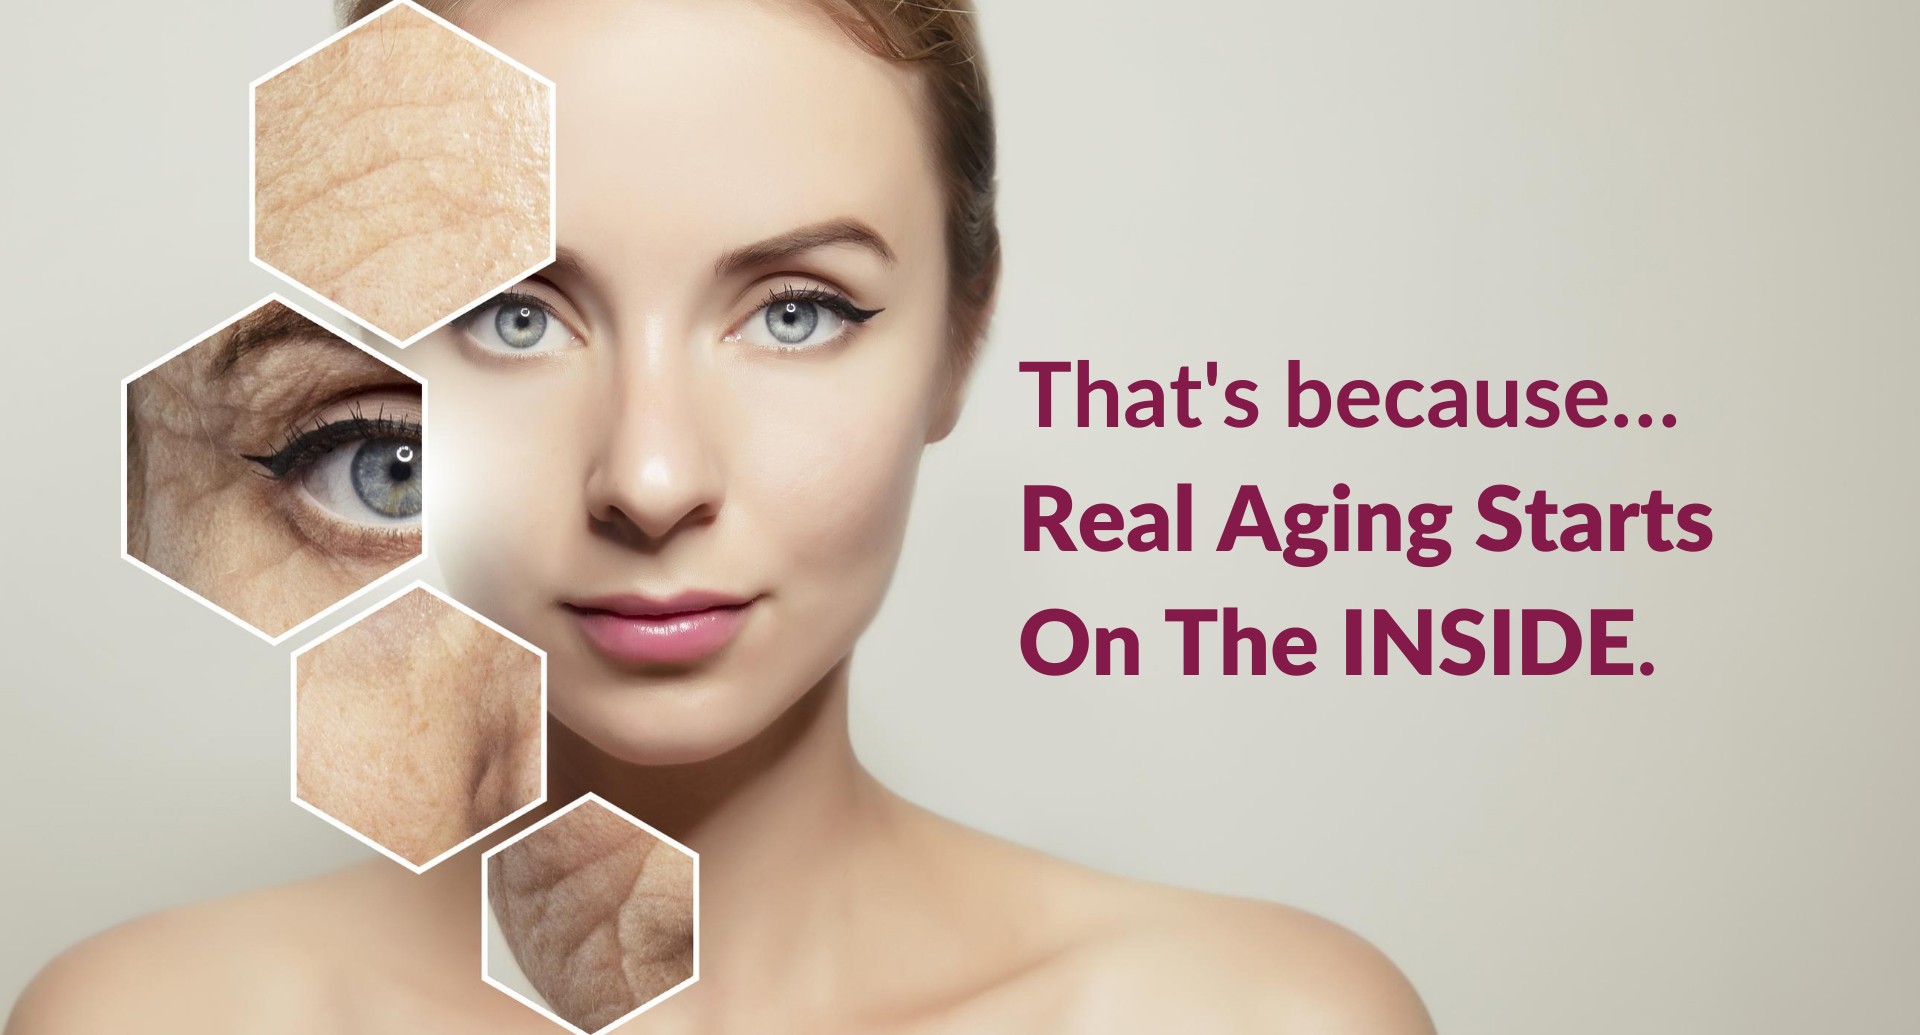 Real Aging Starts On The Inside